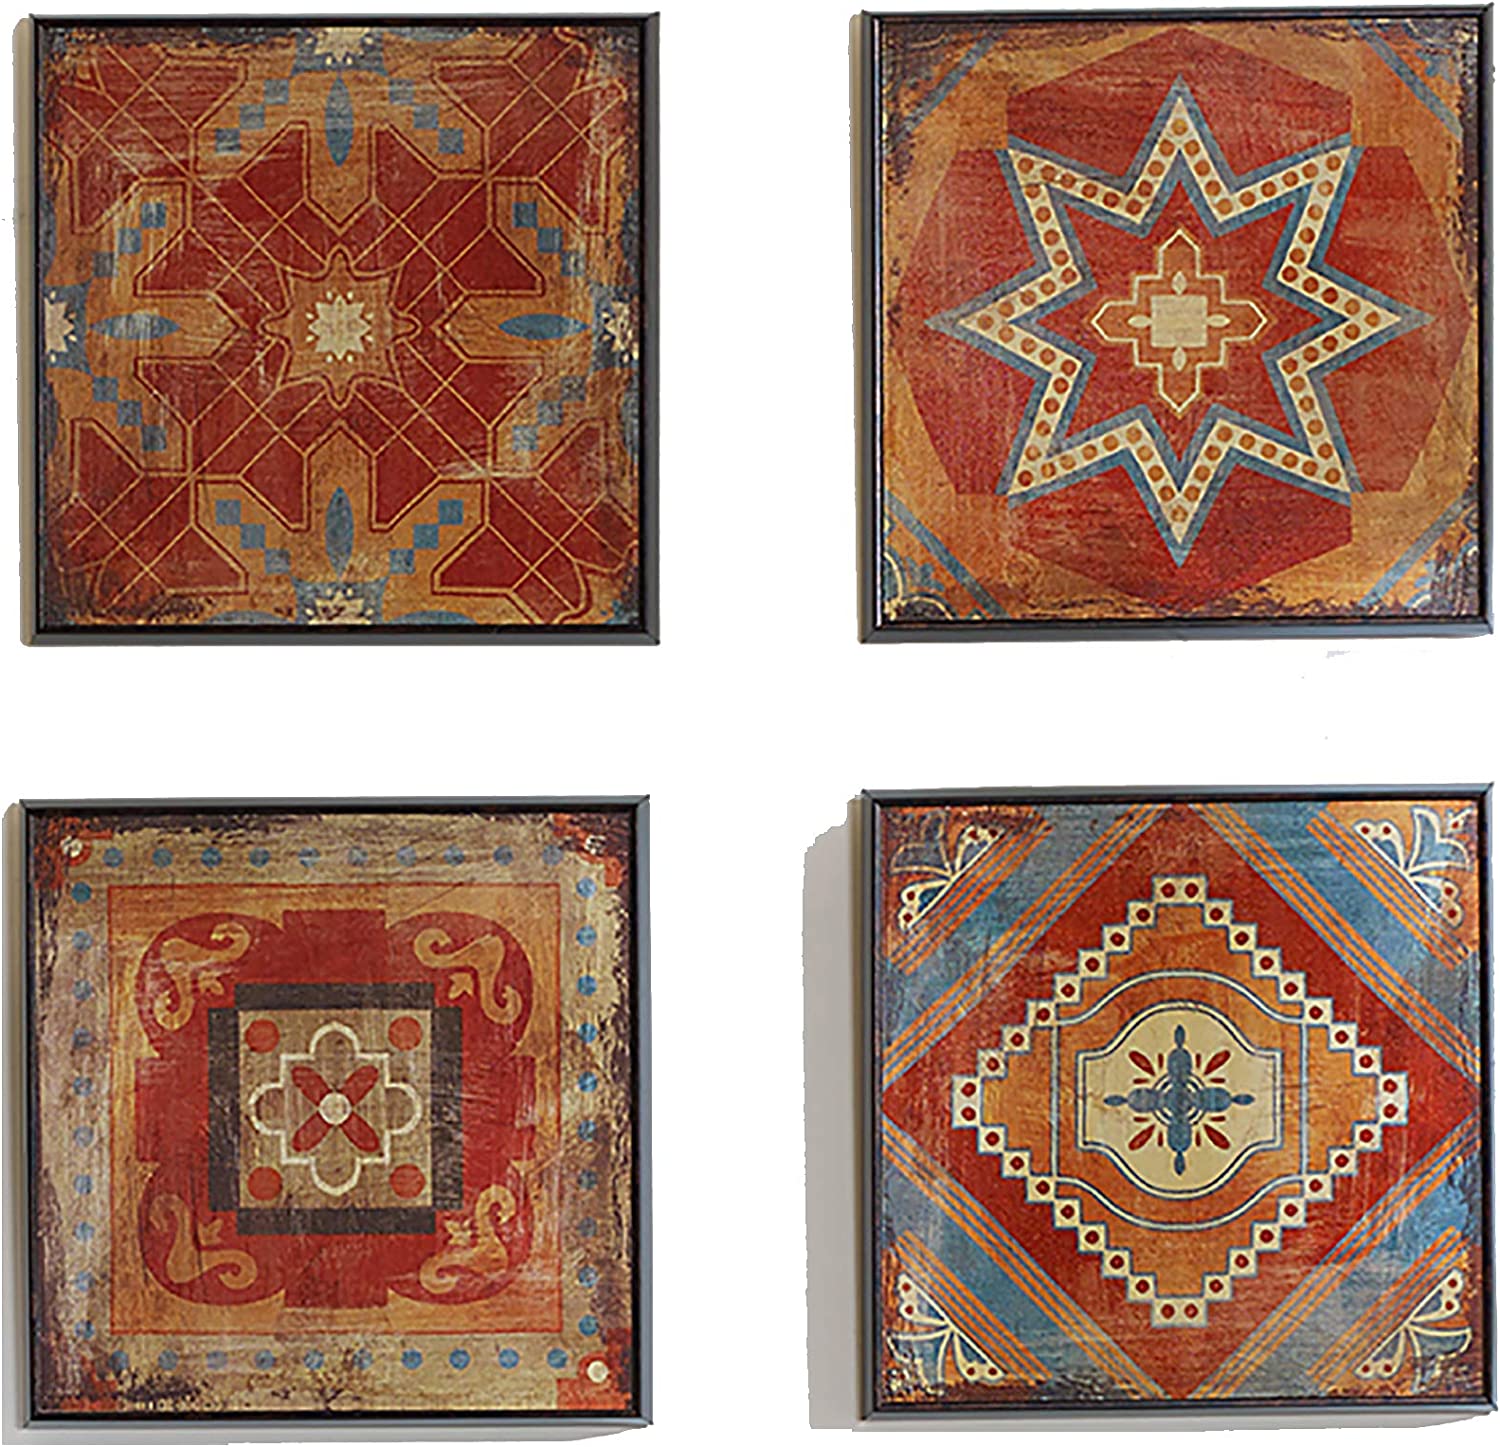 Madison Park Moroccan Tile Abstract Canvas Wall Art Bohemian Painting Home D√É∆í√Ç¬©cor, Abstract Stretched 4 Piece Set Canvas Painting for Living Room, Easy to Hang Deco Box Framed, Blue/Orange, Red